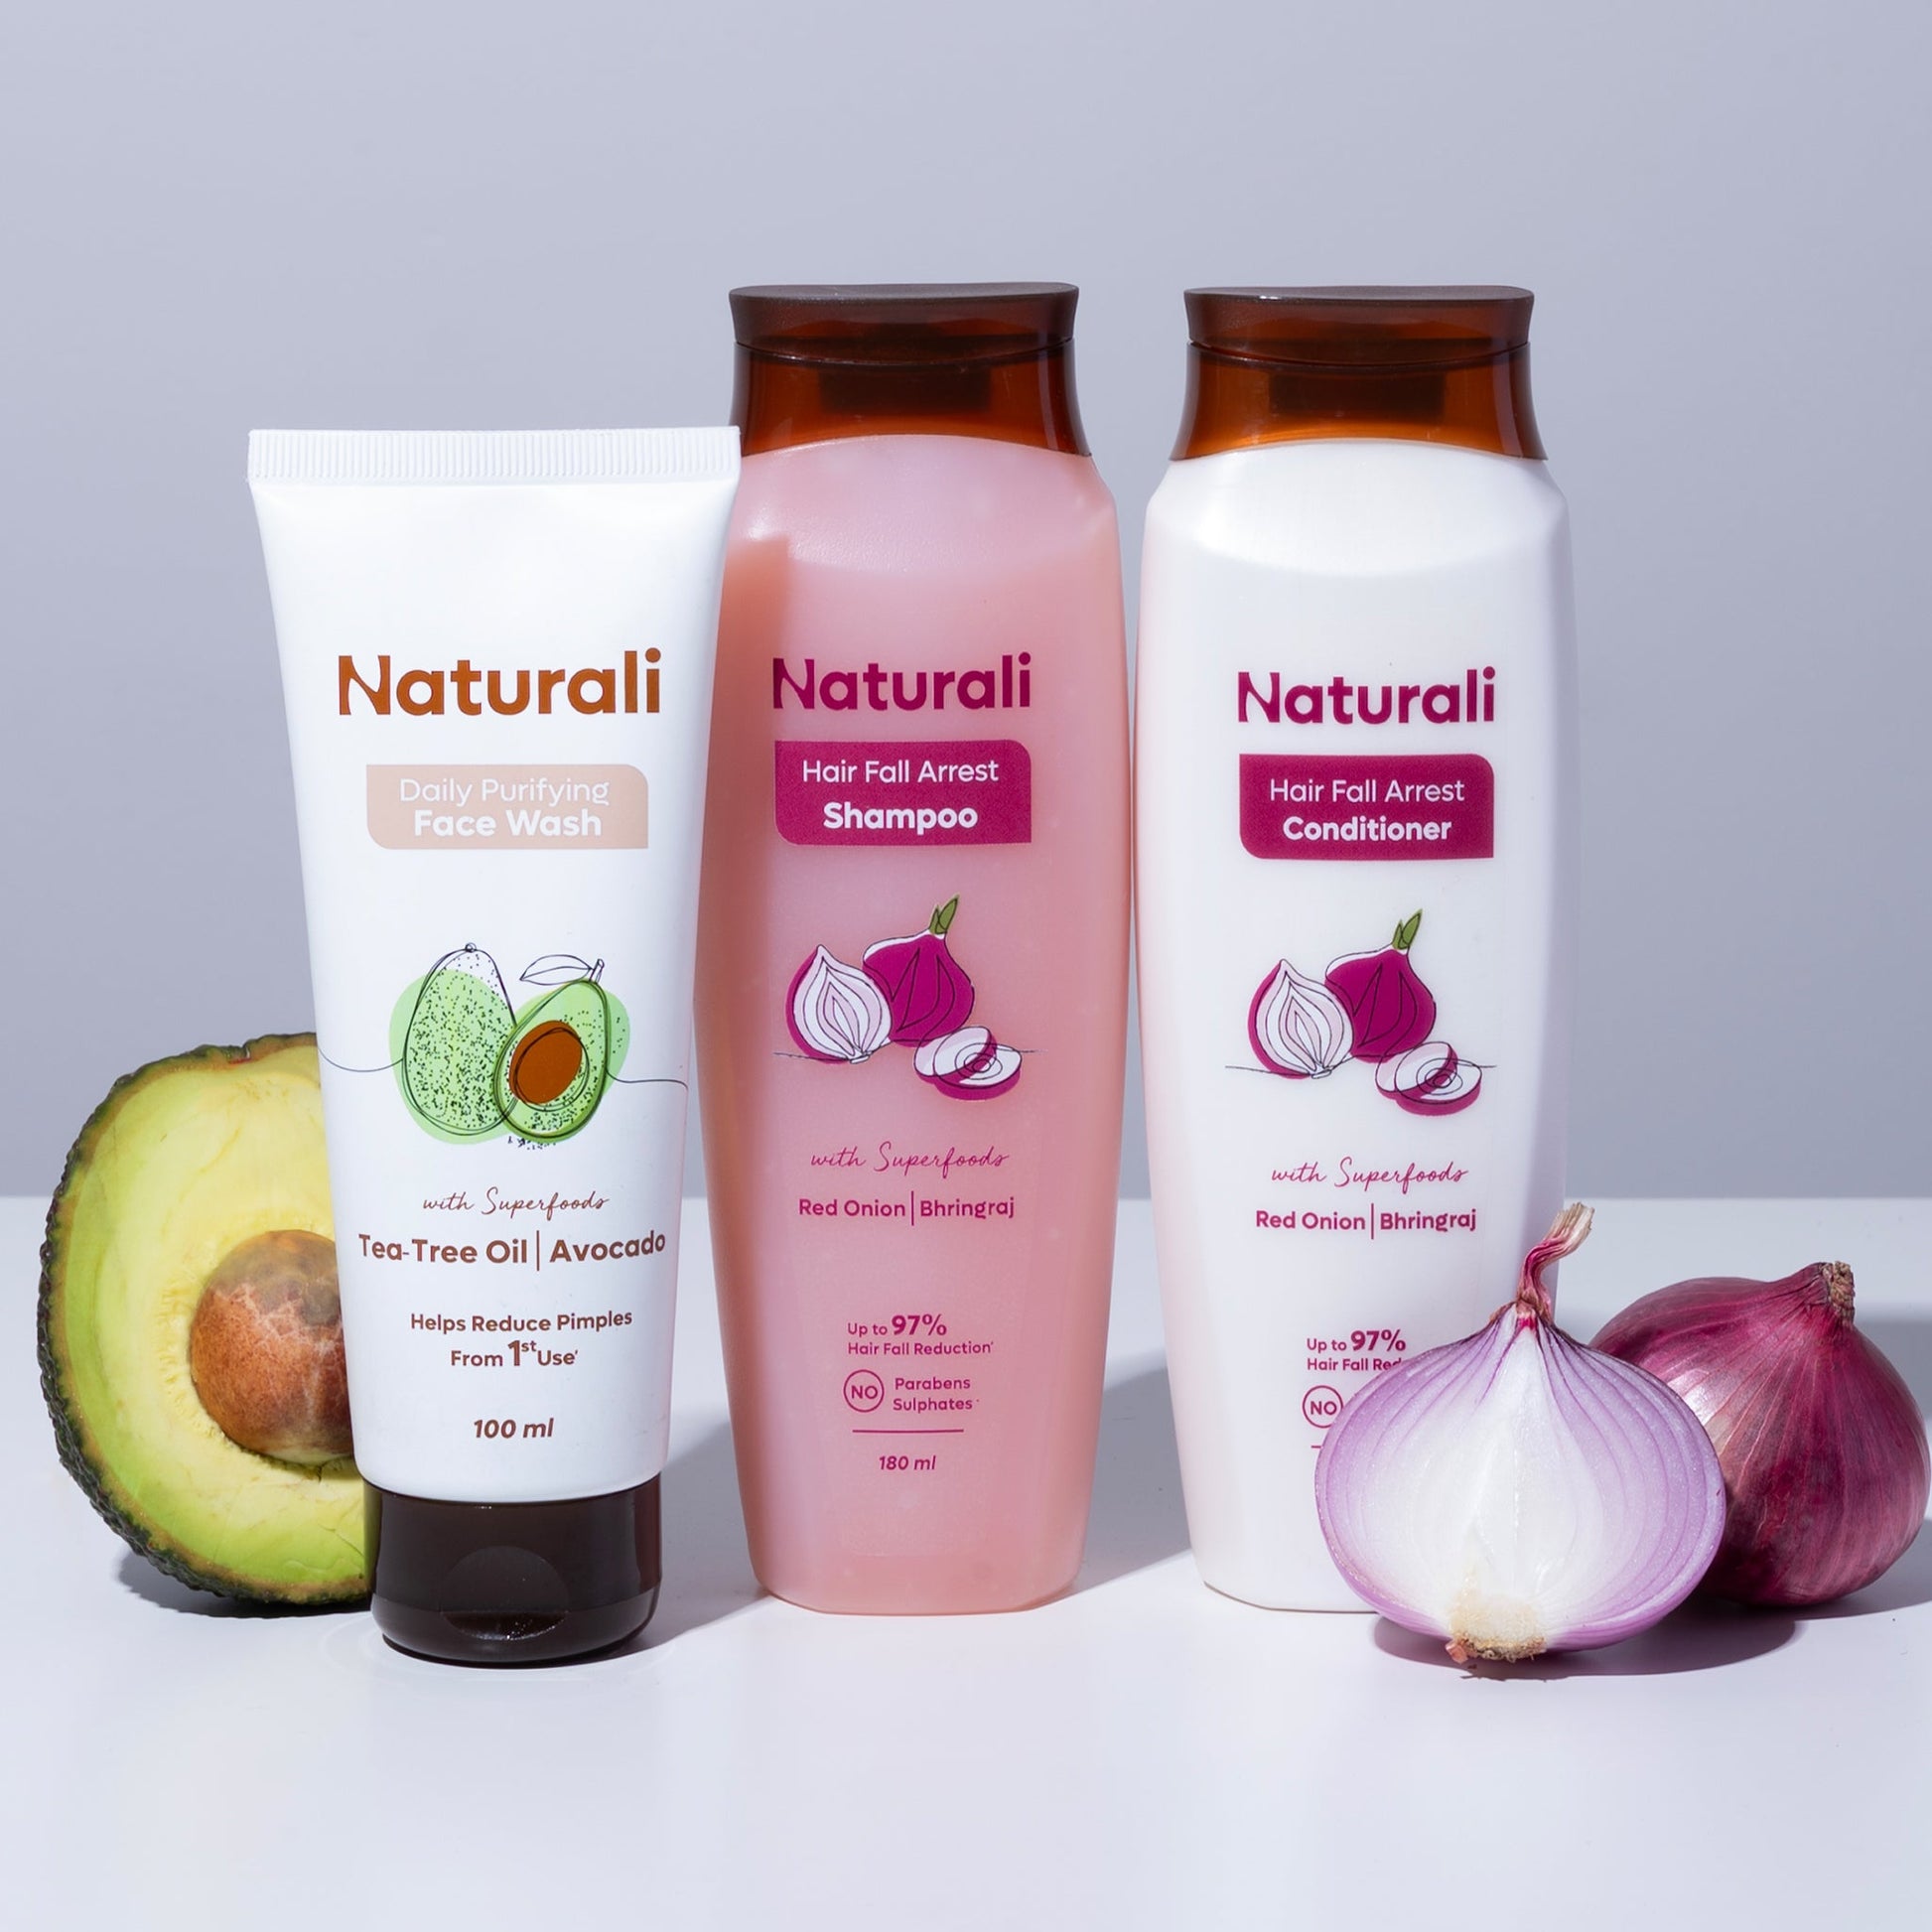 Naturali Hair Fall Arrest Shampoo + Hair Fall Arrest Conditioner + Daily Purifying Face Wash